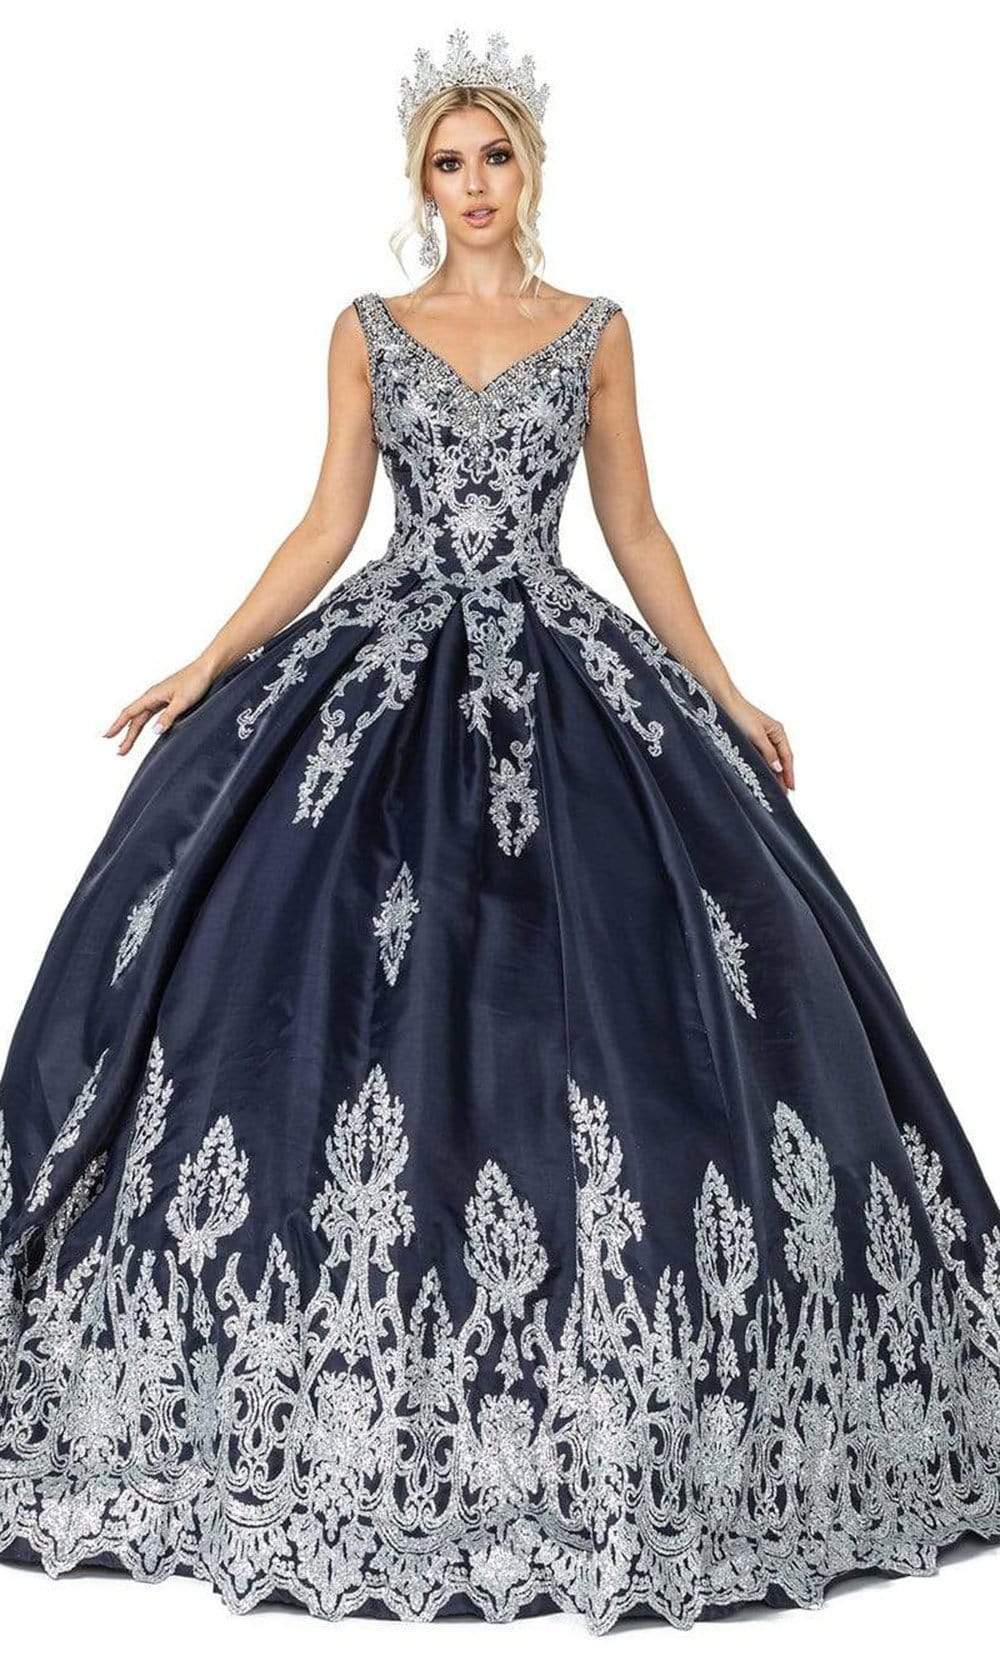 Image of Dancing Queen - 1551 Beaded Lace Applique Embellished Ballgown